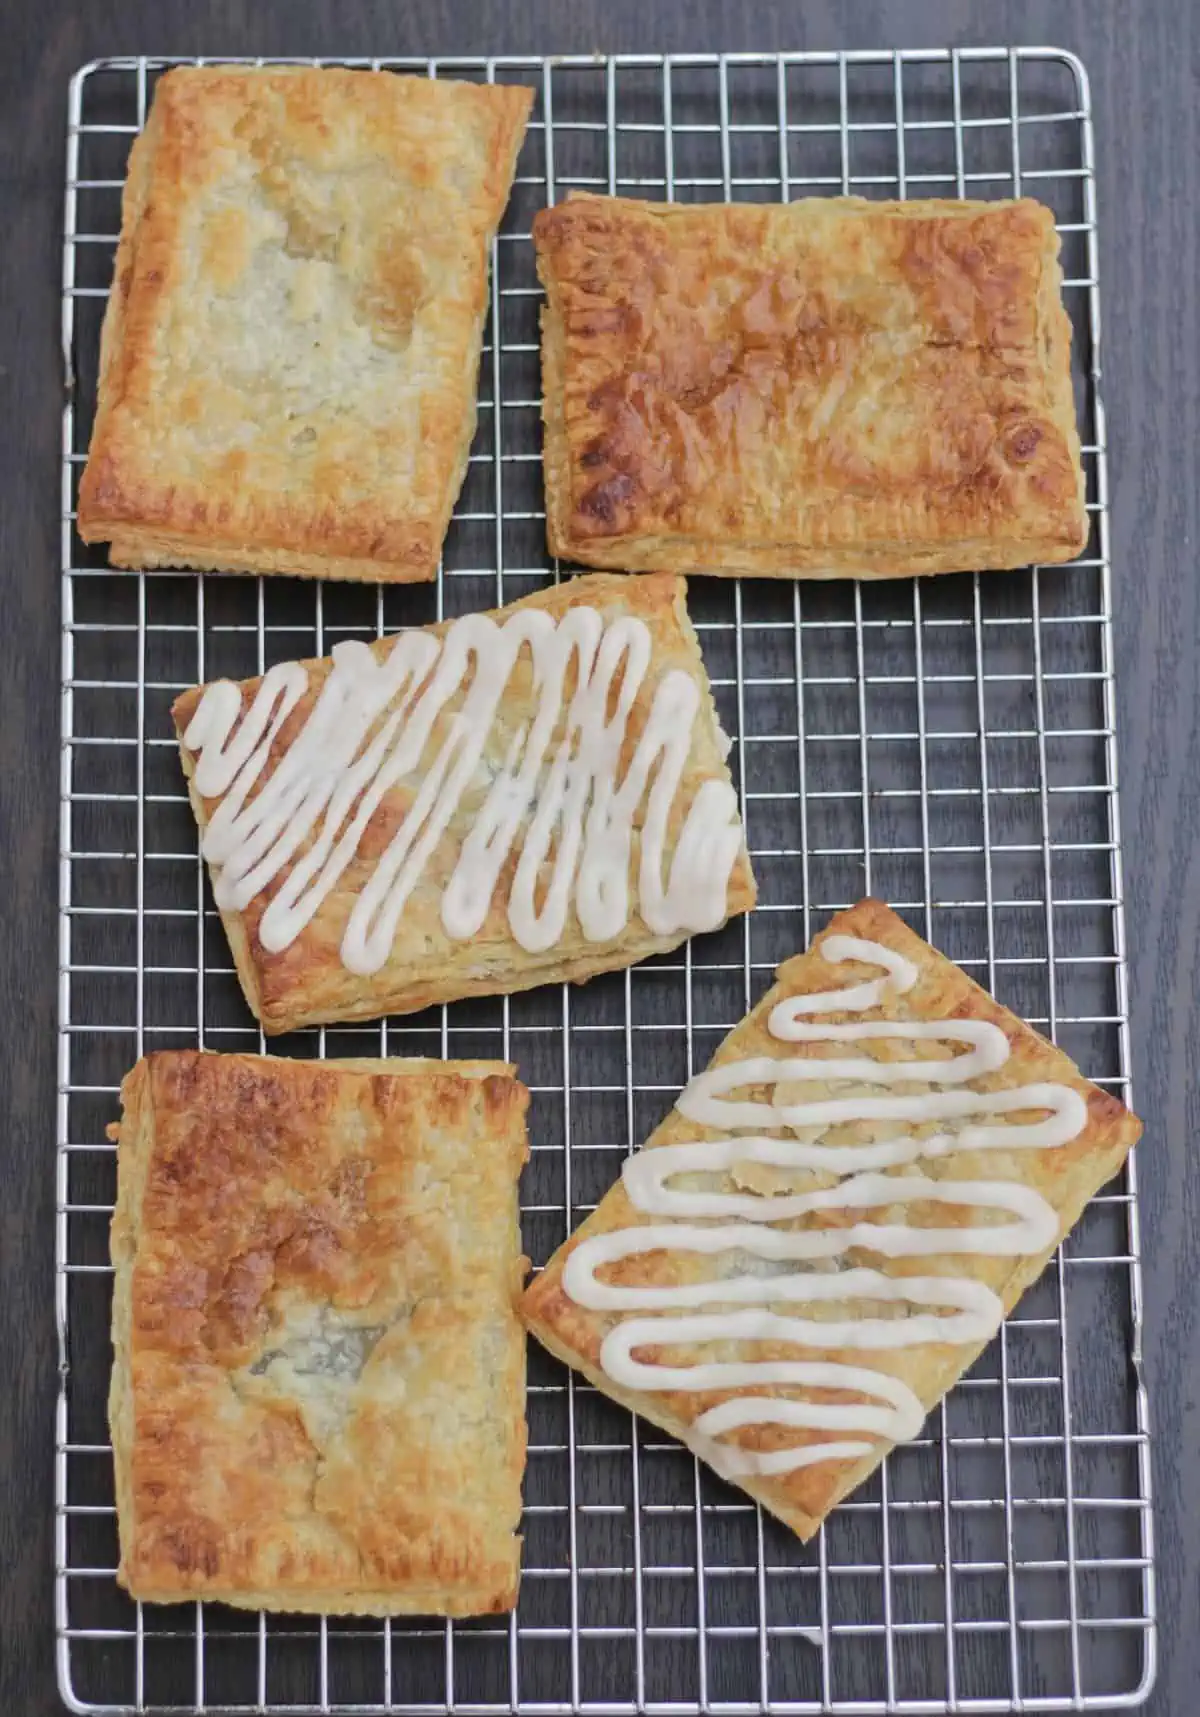 5 toaster strudels with icing drizzle on a rack.